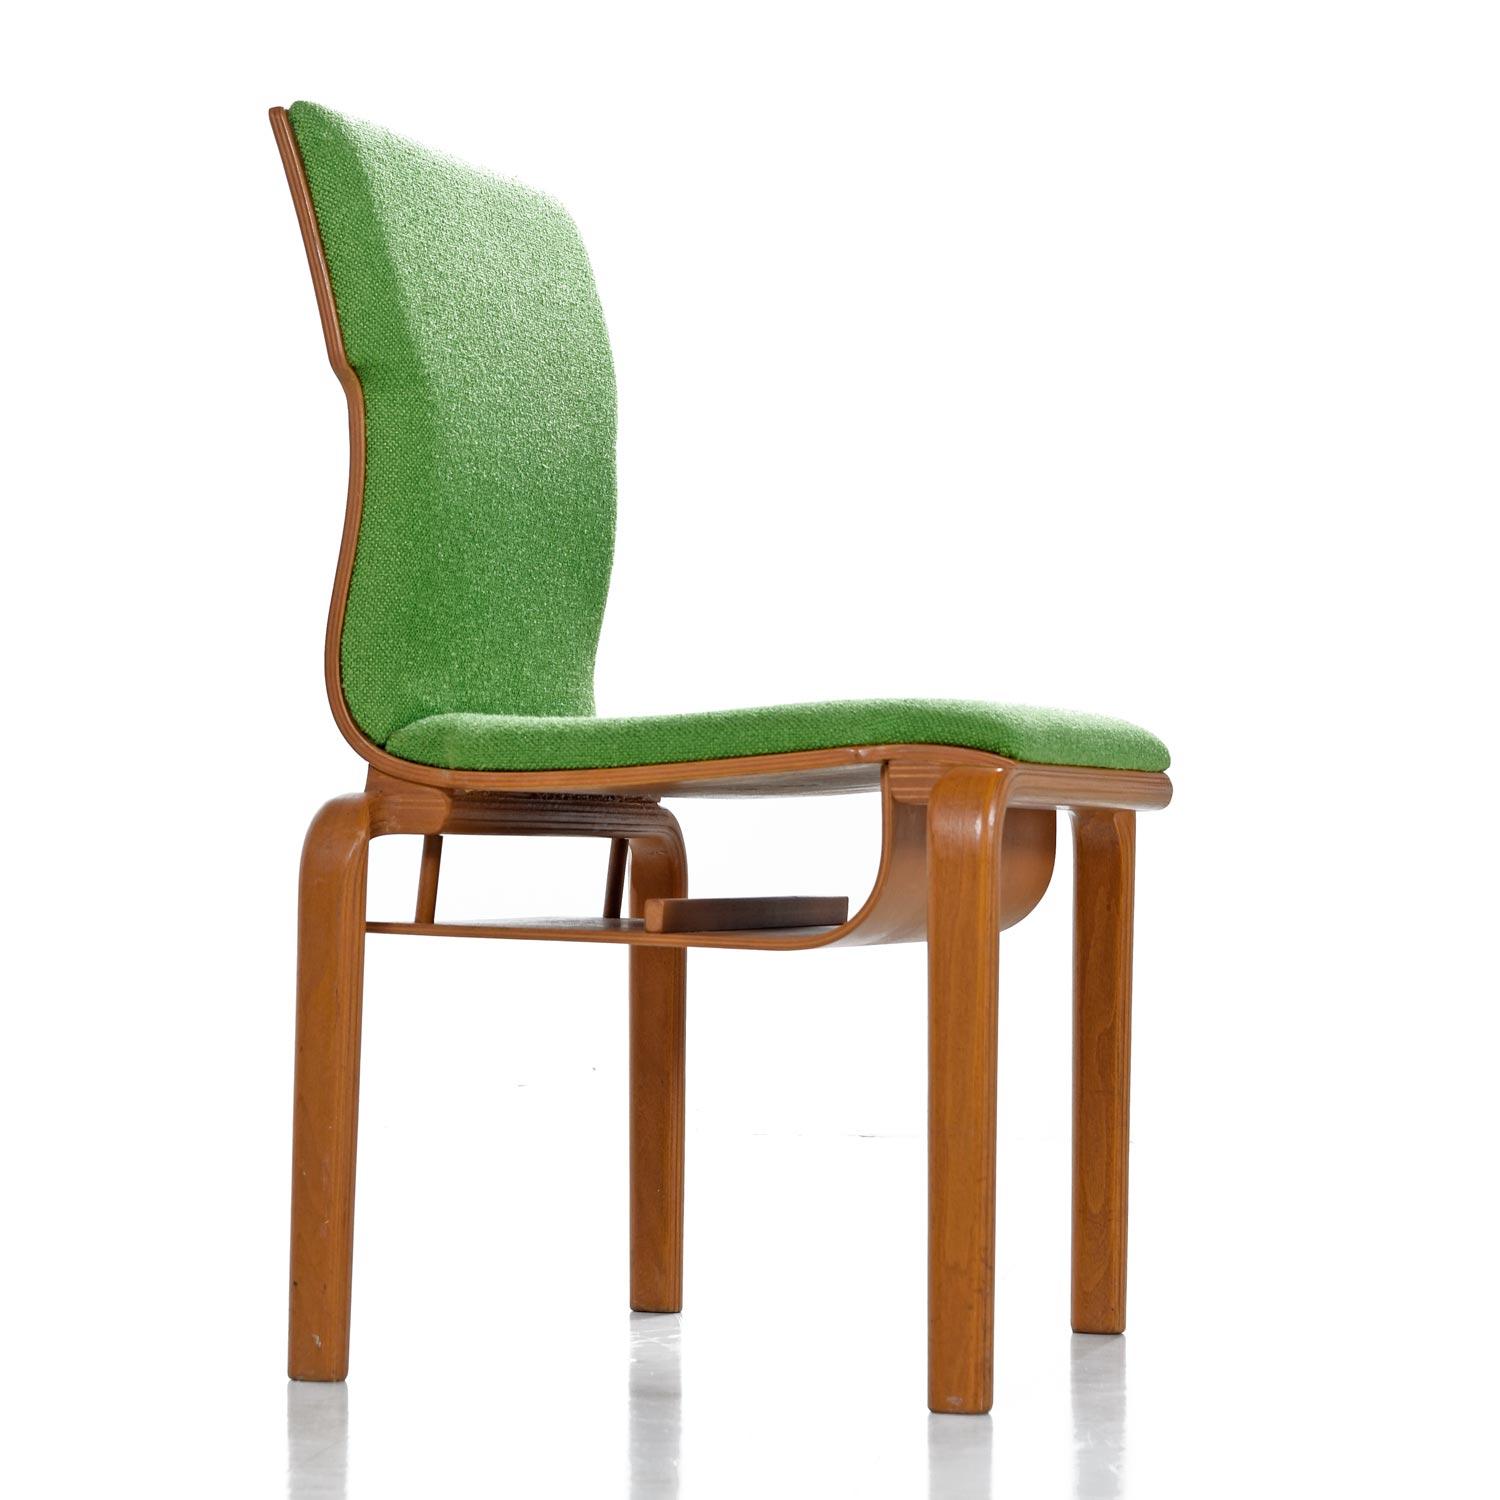 Thonet Style Mid-Century Modern Maple Bent Ply Green Wool Tweed Dining Chair Set 2